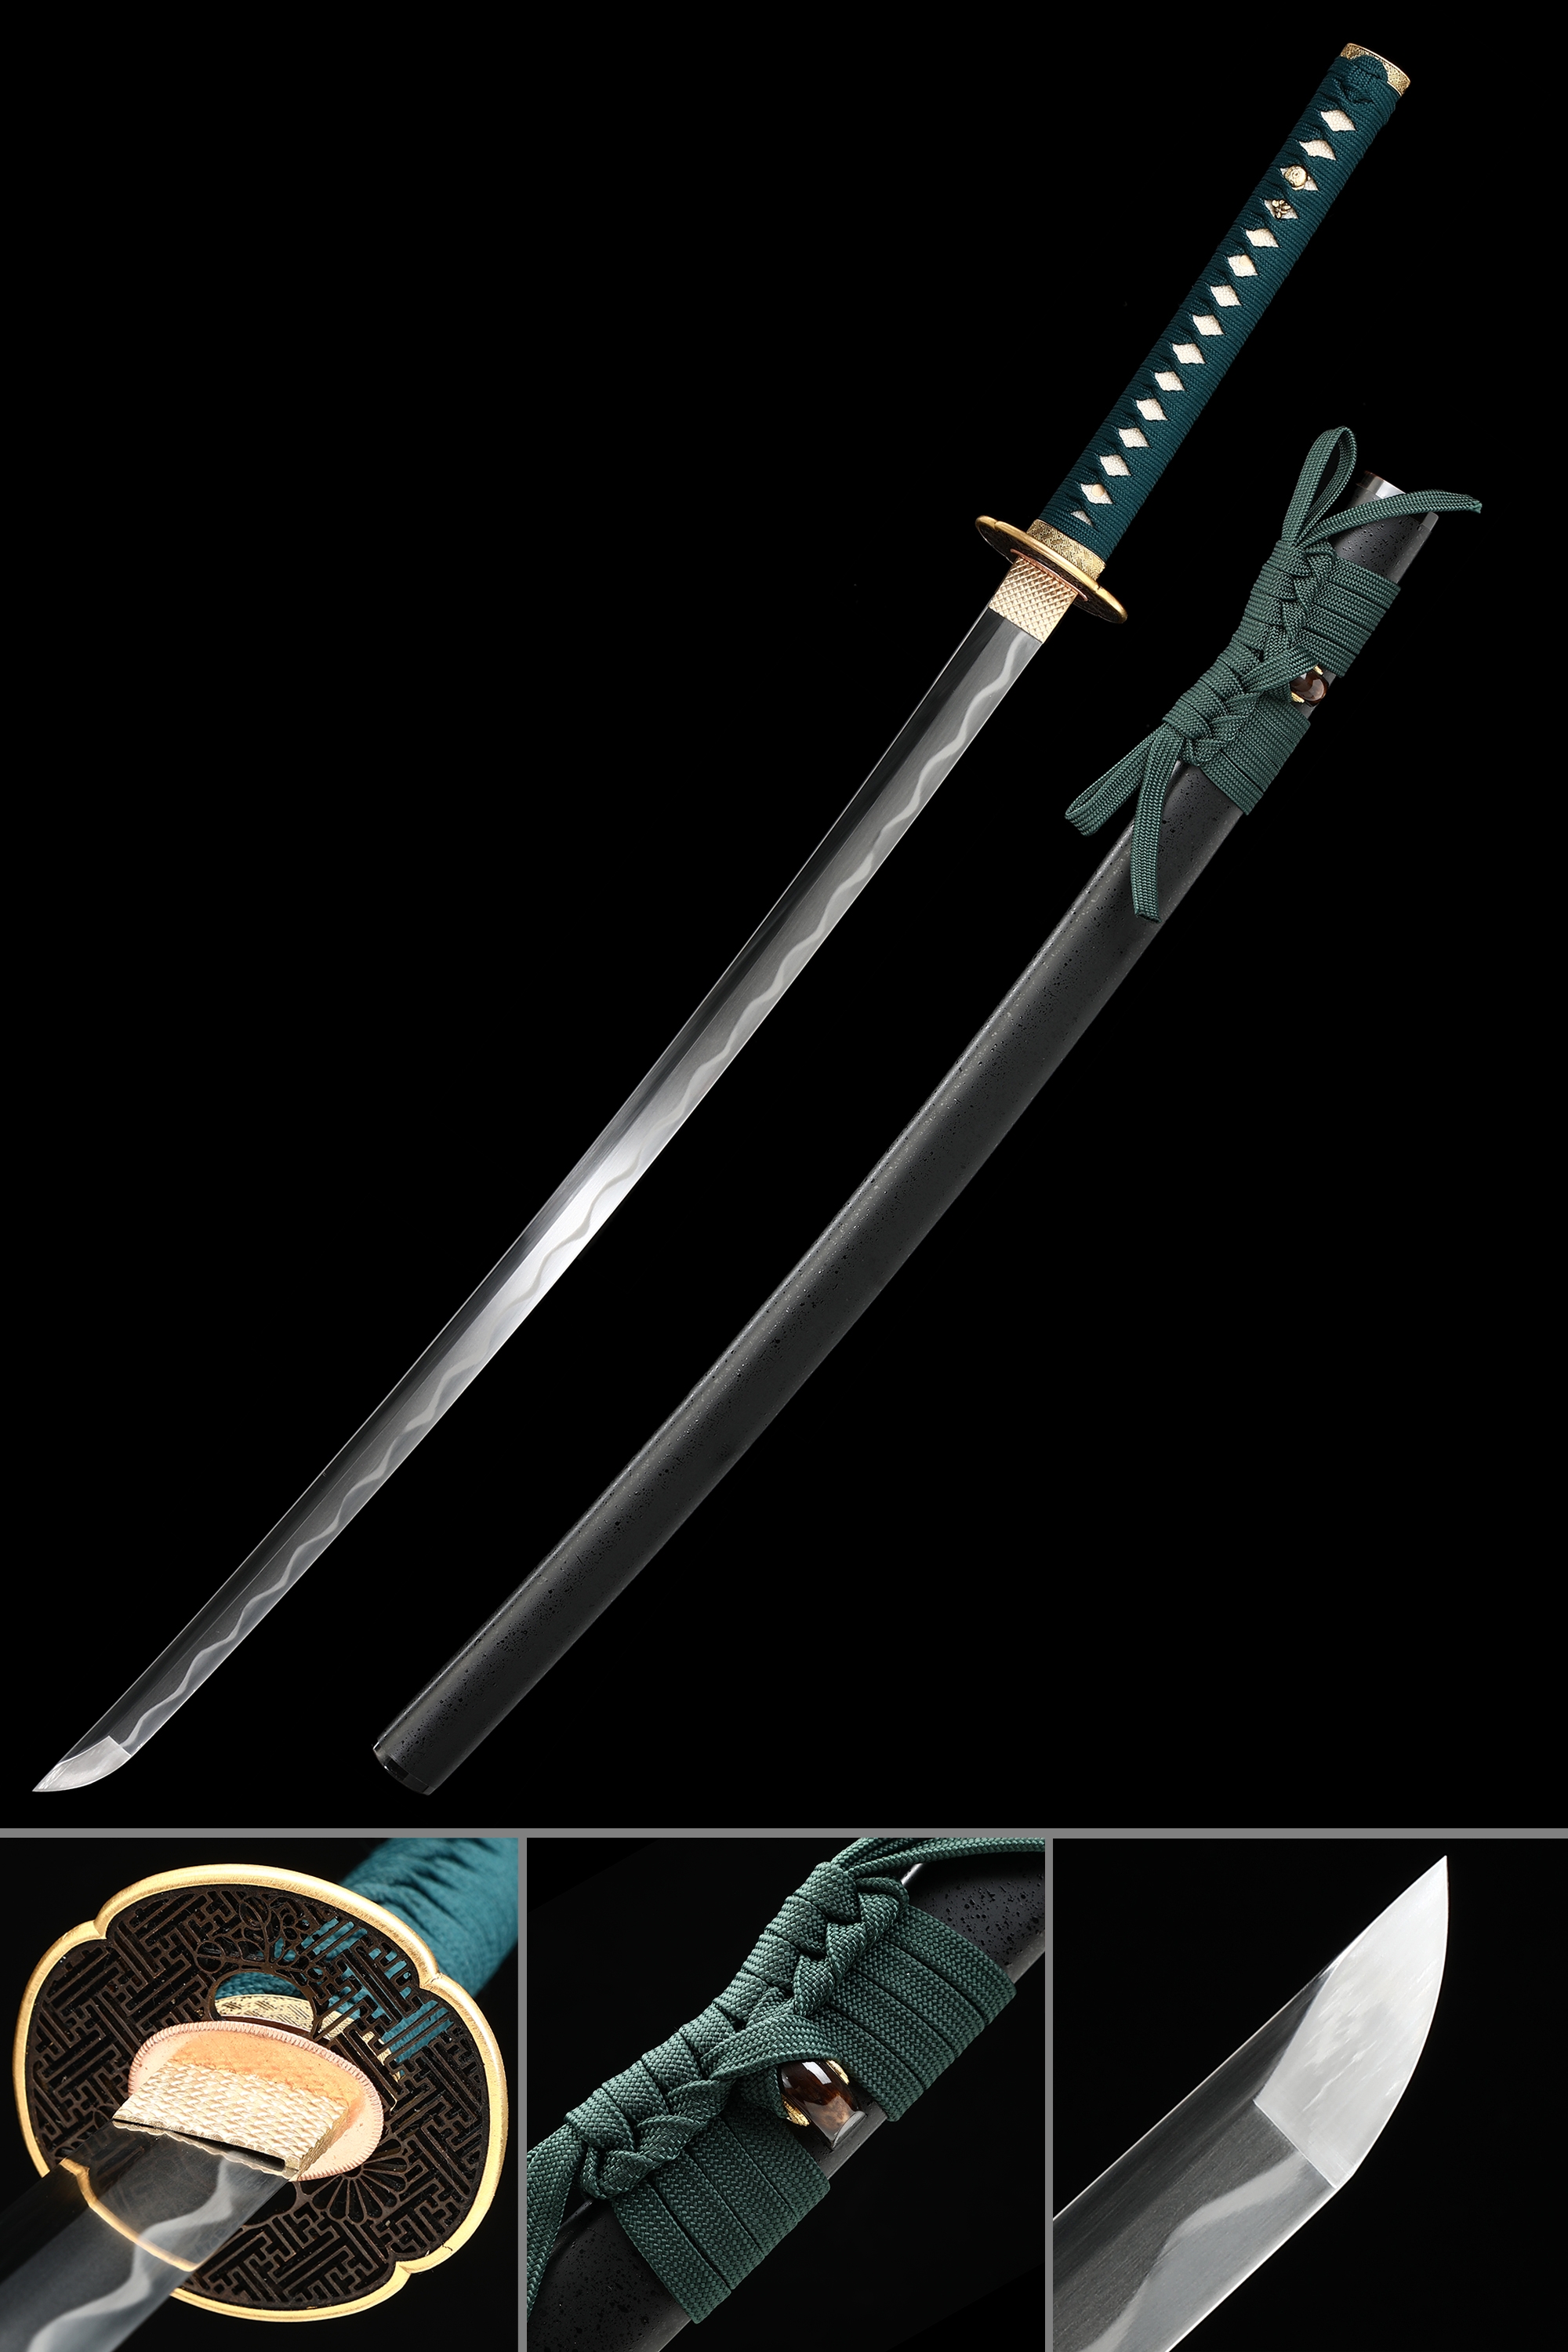 High-performance Handcrafted Katana Sword T10 Carbon Steel With Hand-sharpened Blade